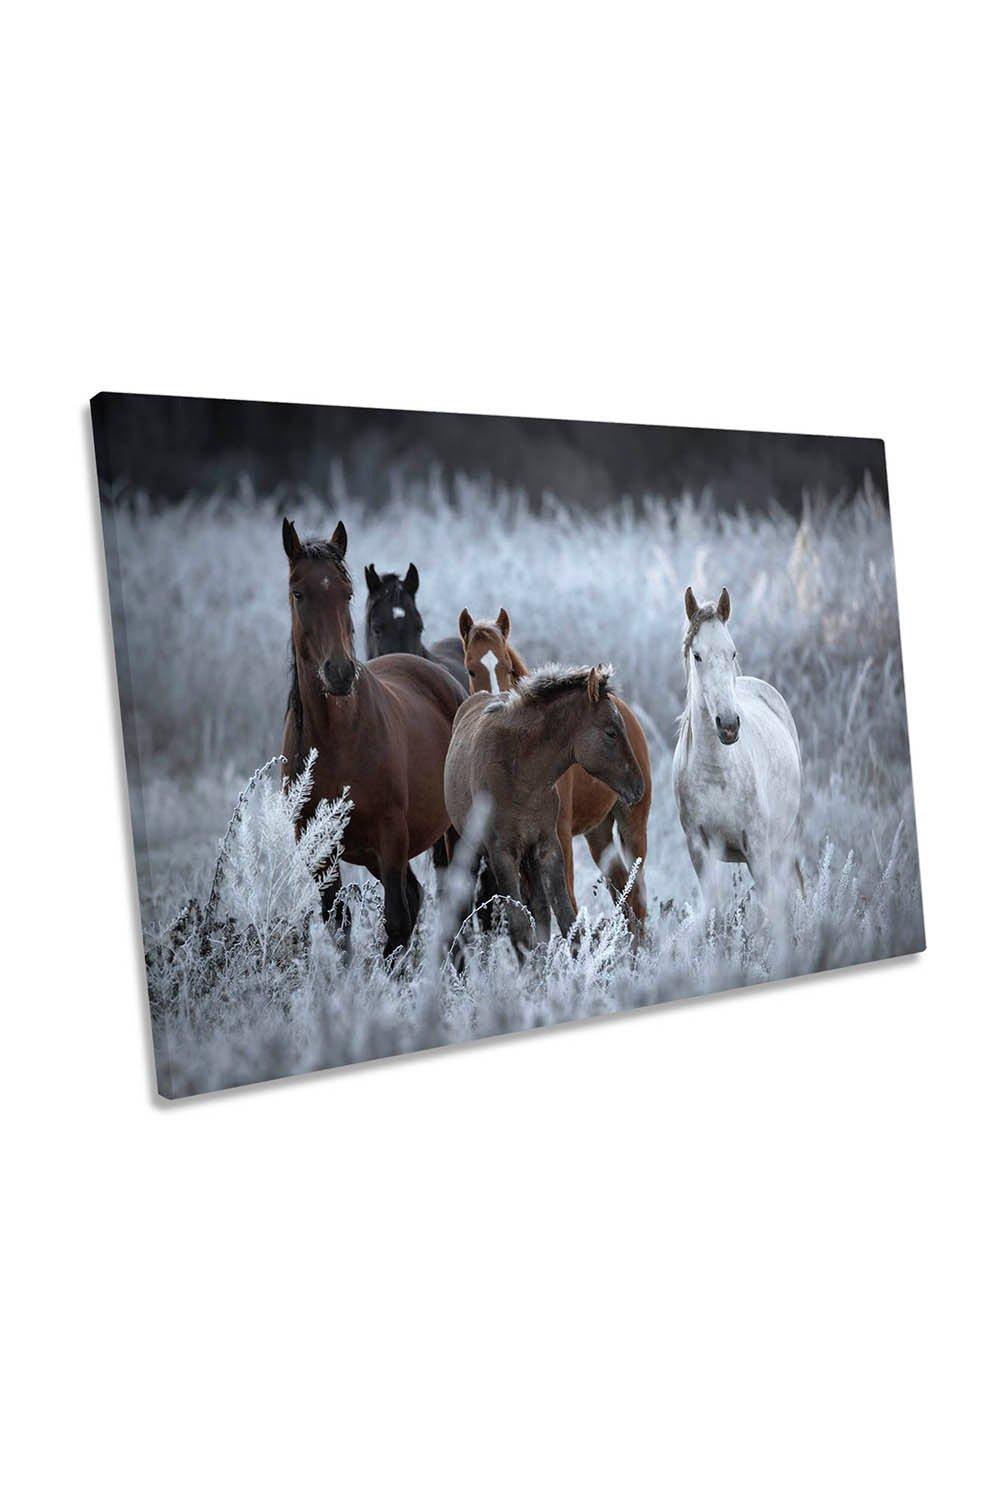 One Frosty Morning Horses Canvas Wall Art Picture Print